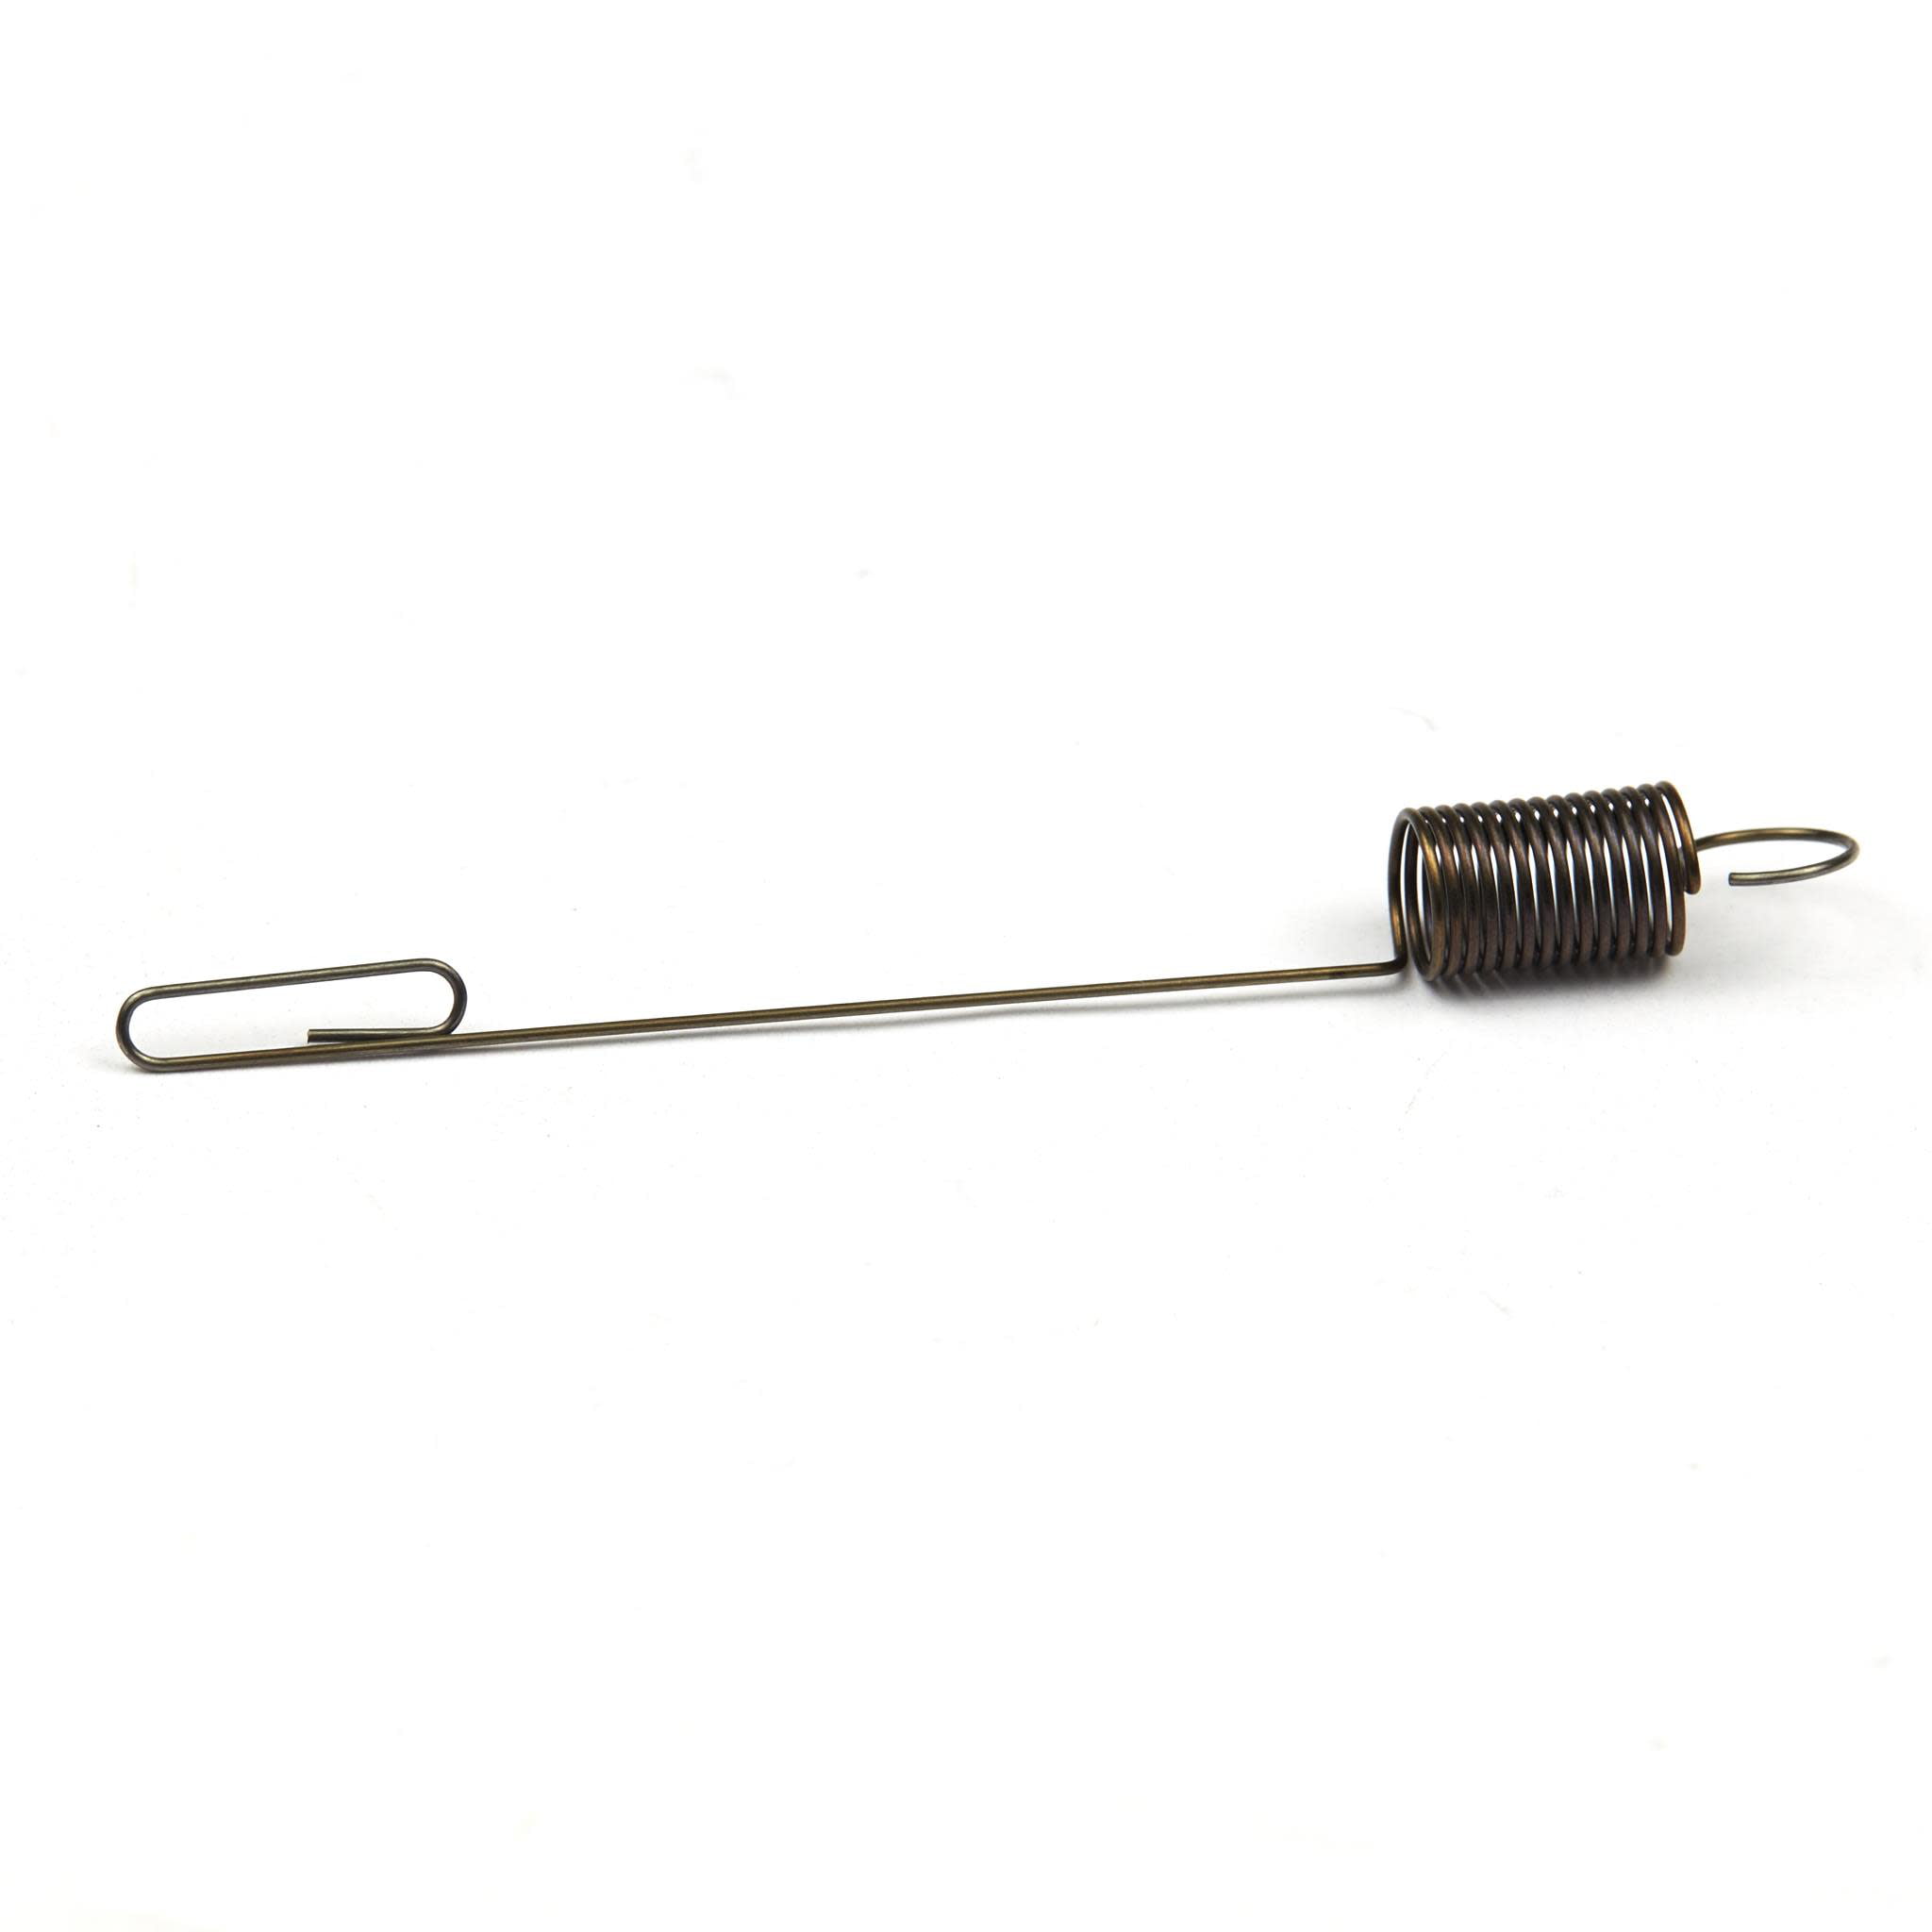 Briggs & Stratton 796484 Governor Spring for sale online 